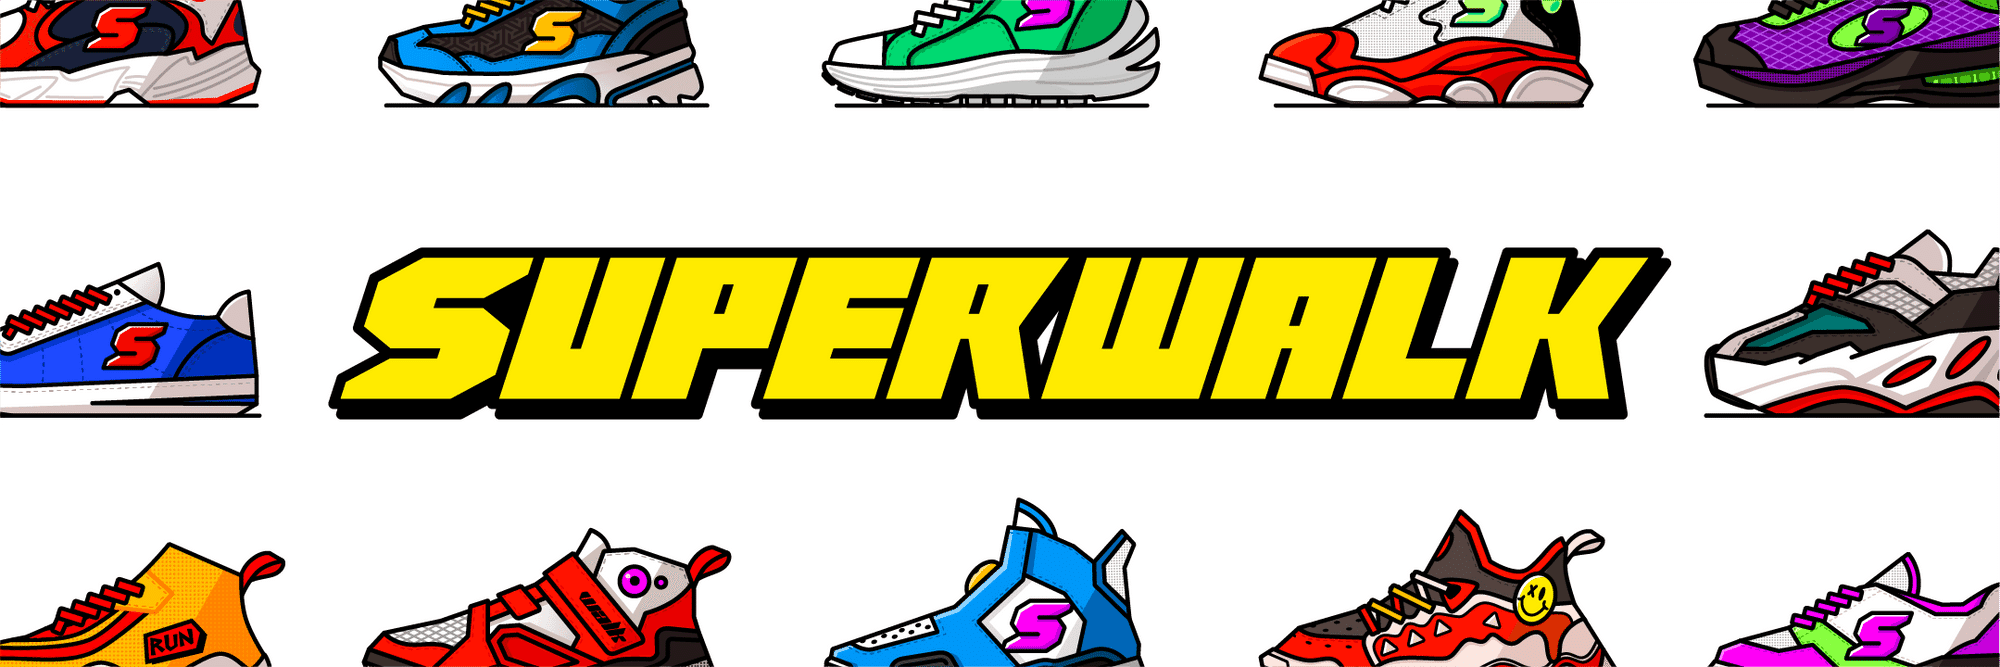 SuperWalk is a blockchain-based Move-To-Earn service that generates coins through walking, offering rewards for physical activity.